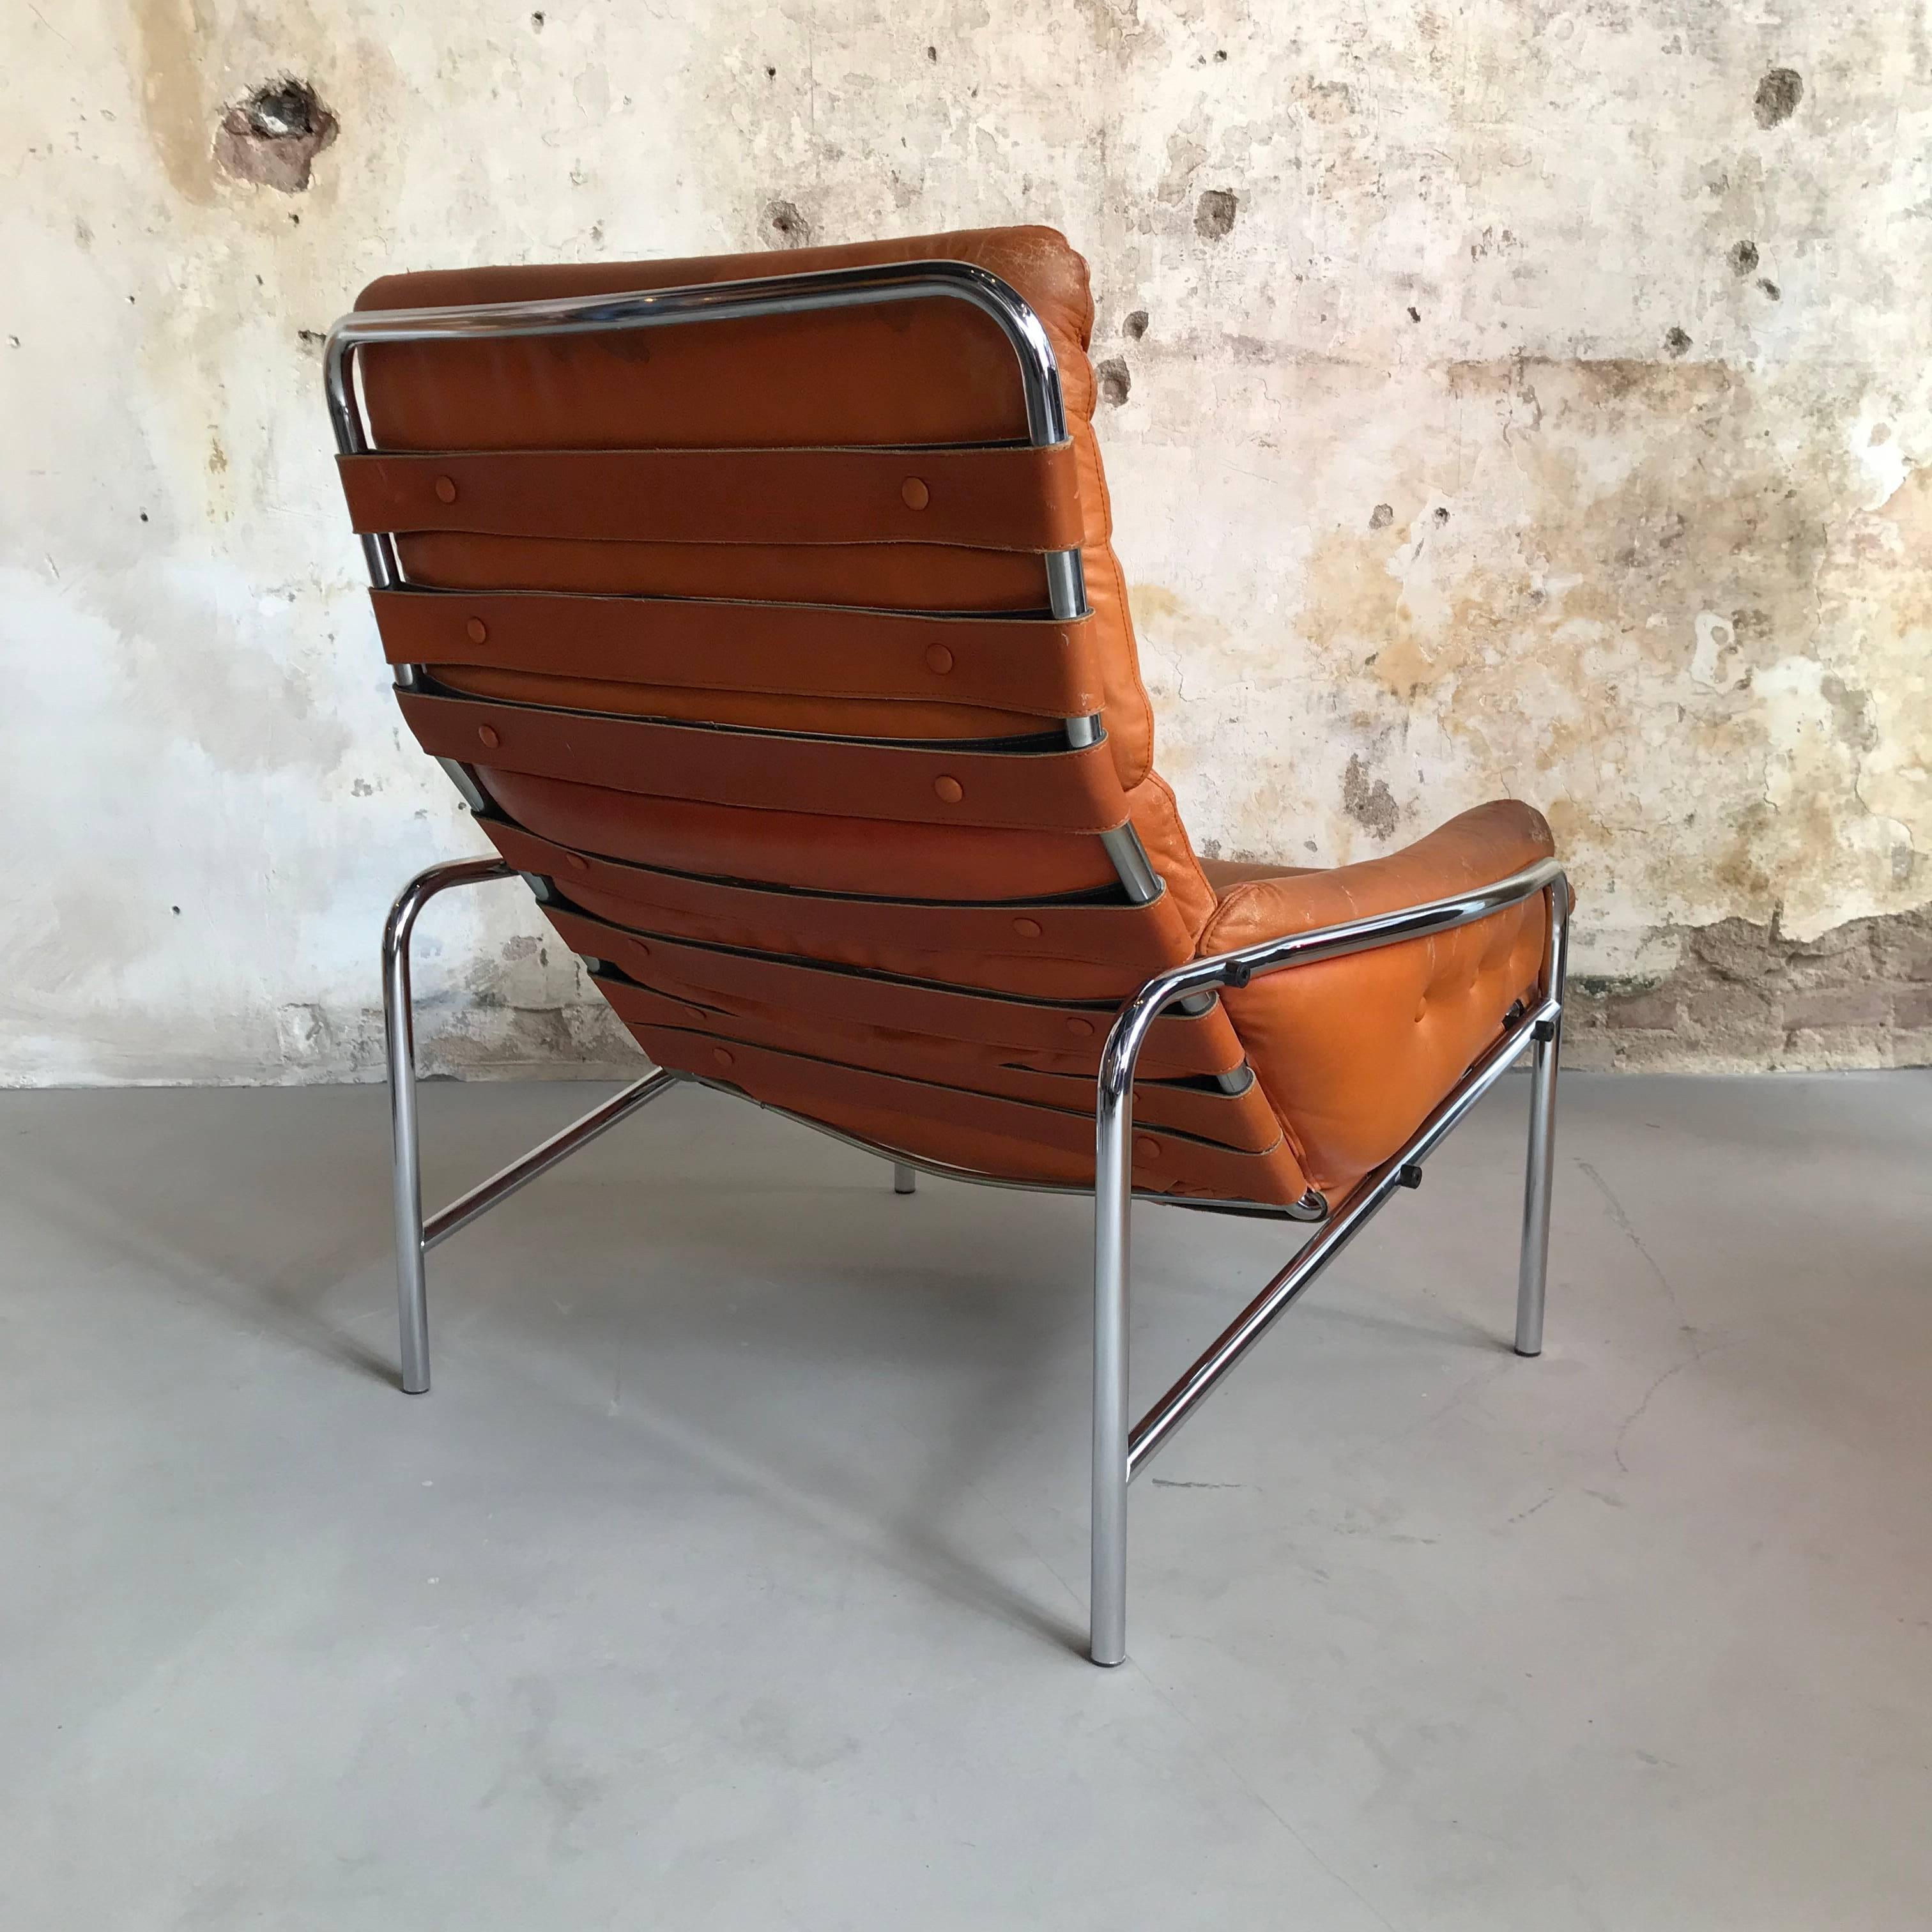 Leather 1970s Lounge Chair Plus Ottoman SZ09 Nagoya by Martin Visser for Spectrum